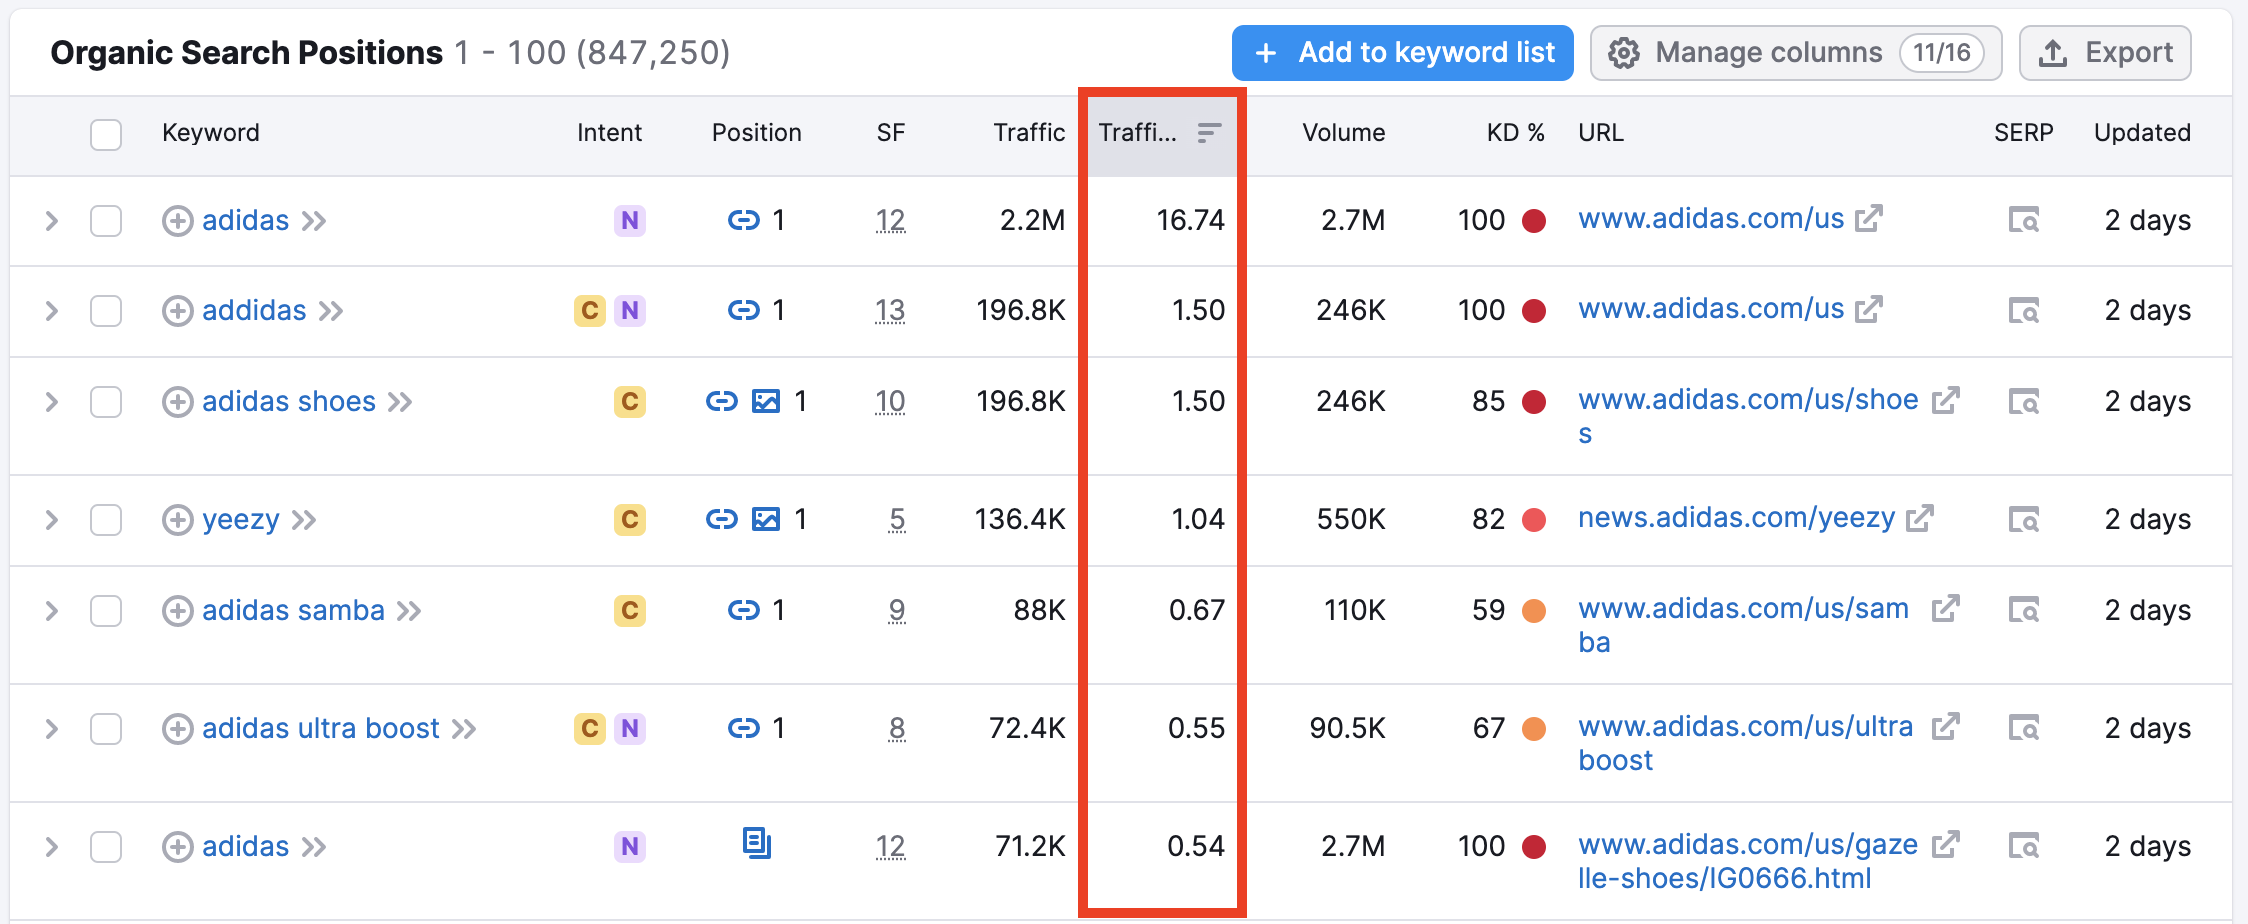 The Traffic percentage column is highlighted in the Organic Search Positions table. 